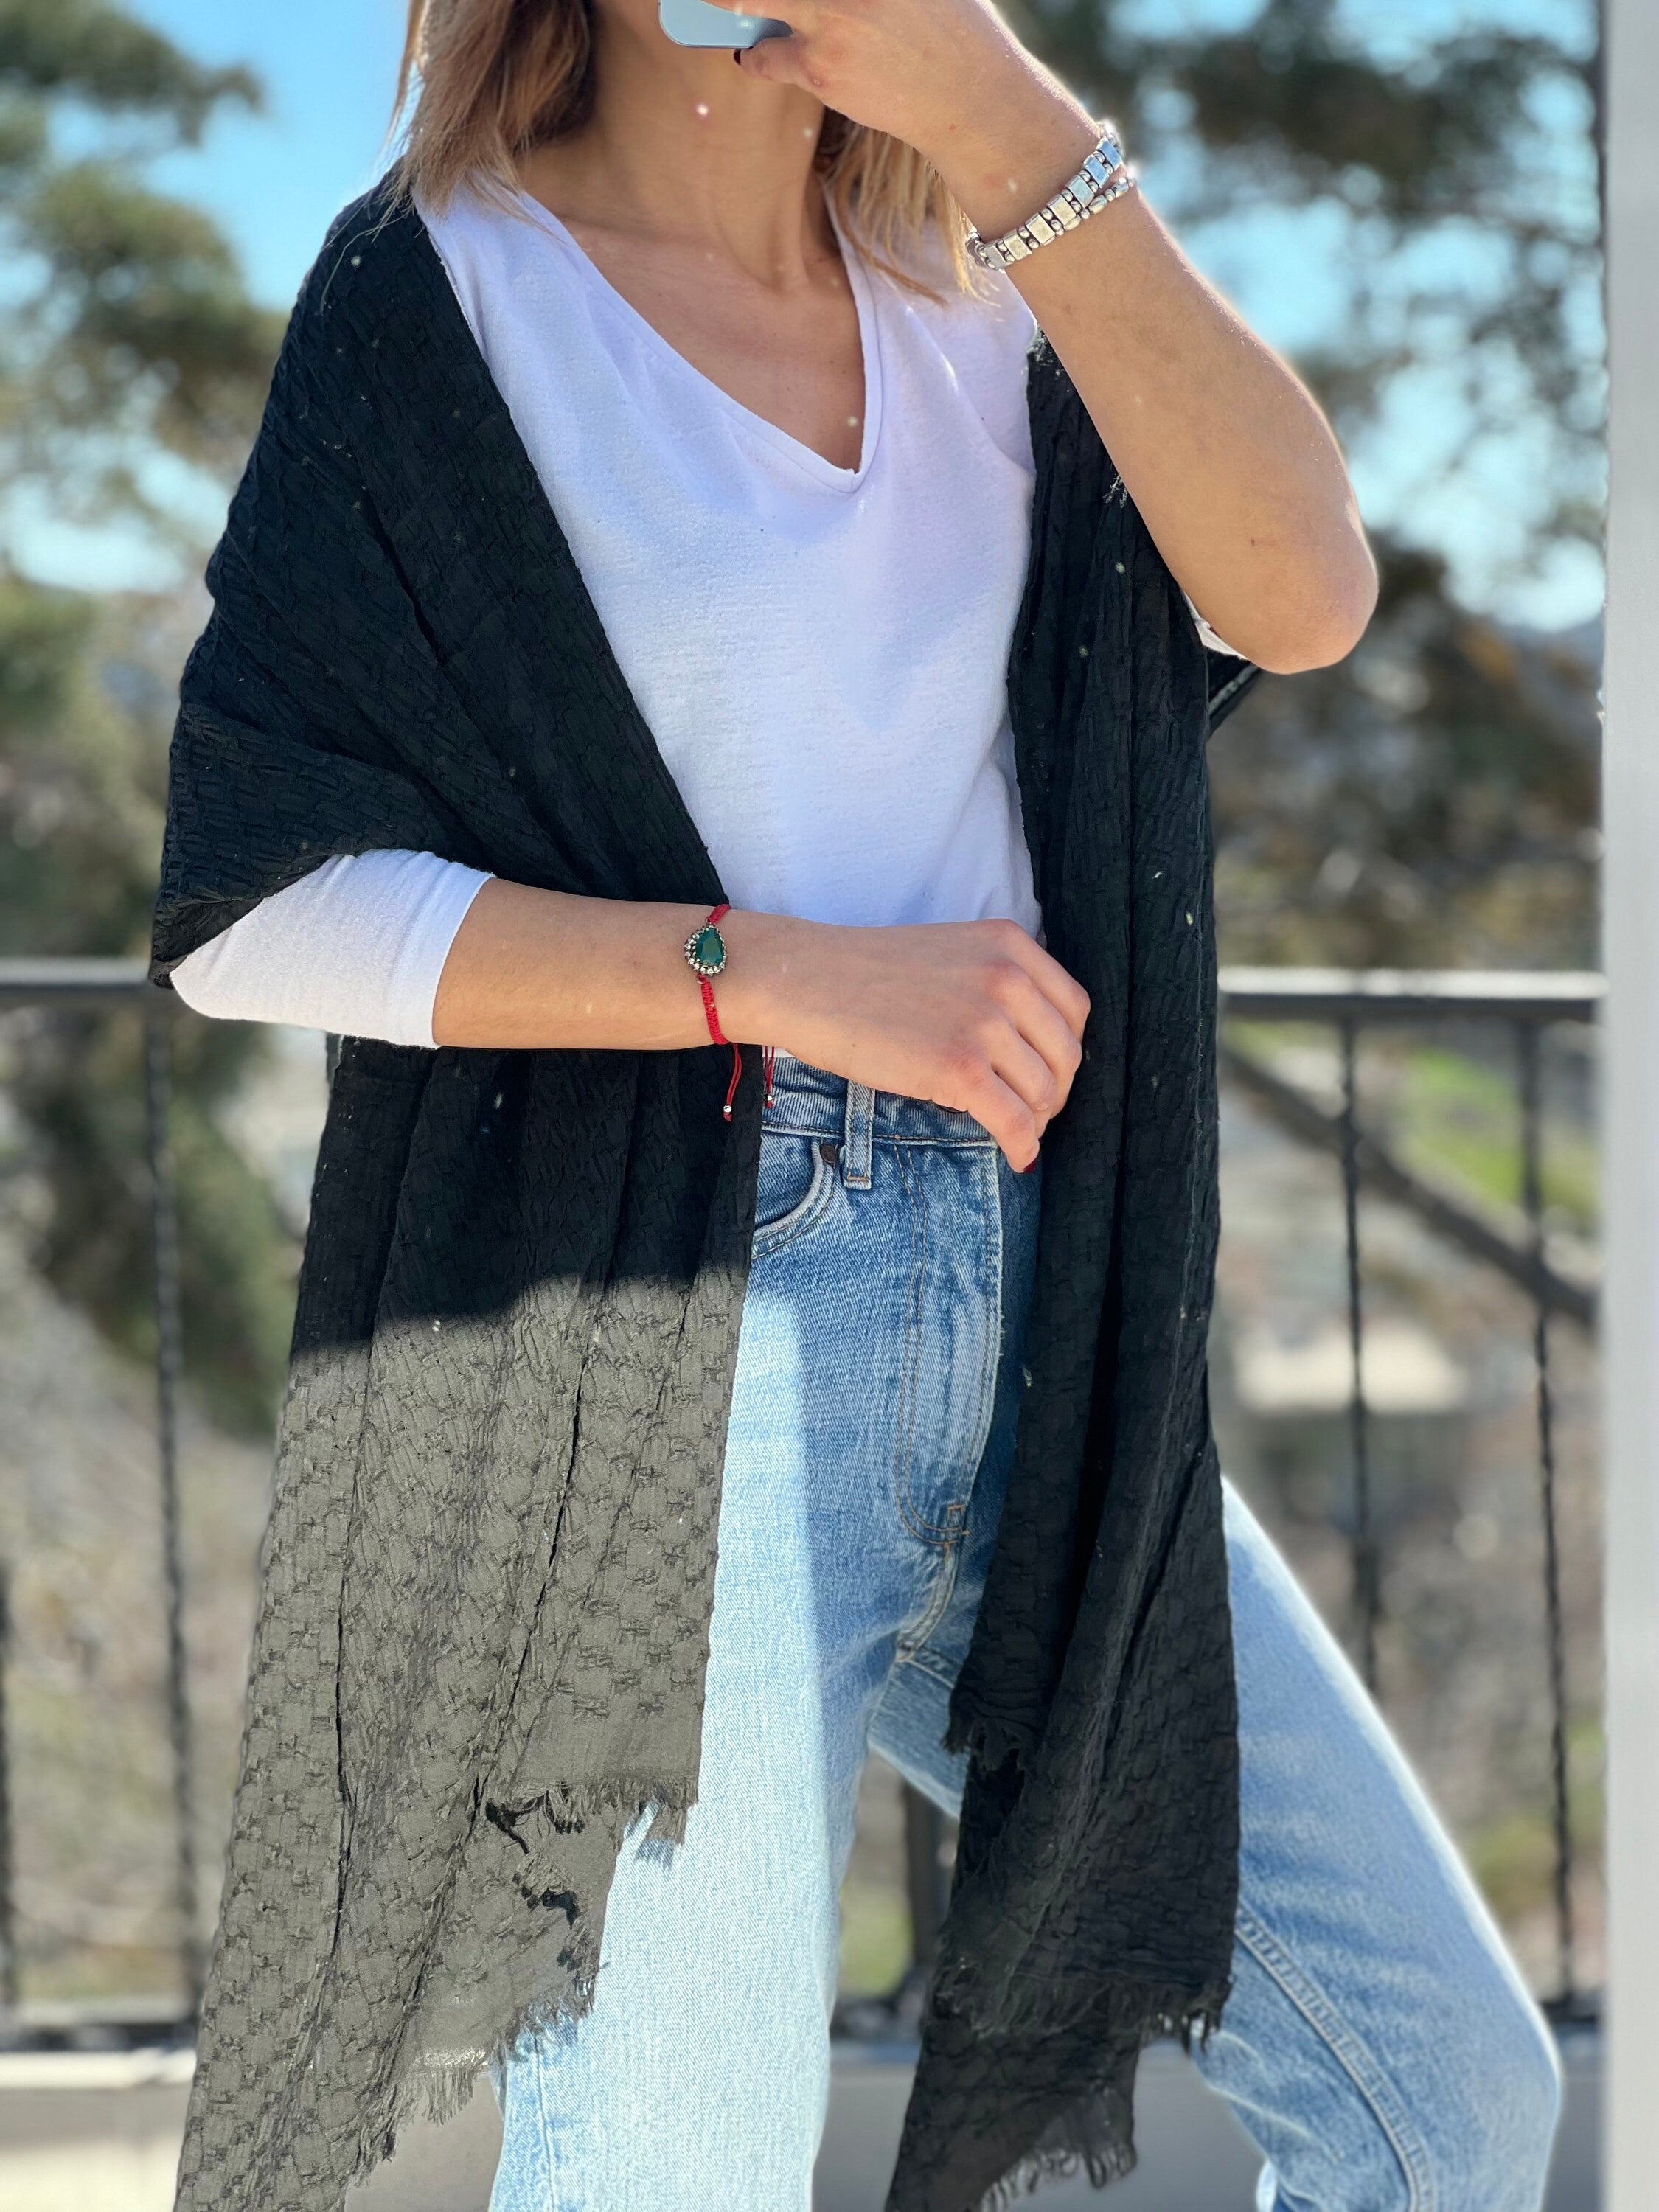 Looking for a gift that will make your mom feel special? This large square scarf is a perfect choice! Made from top-quality soft cotton, it is sure to brighten up her day.